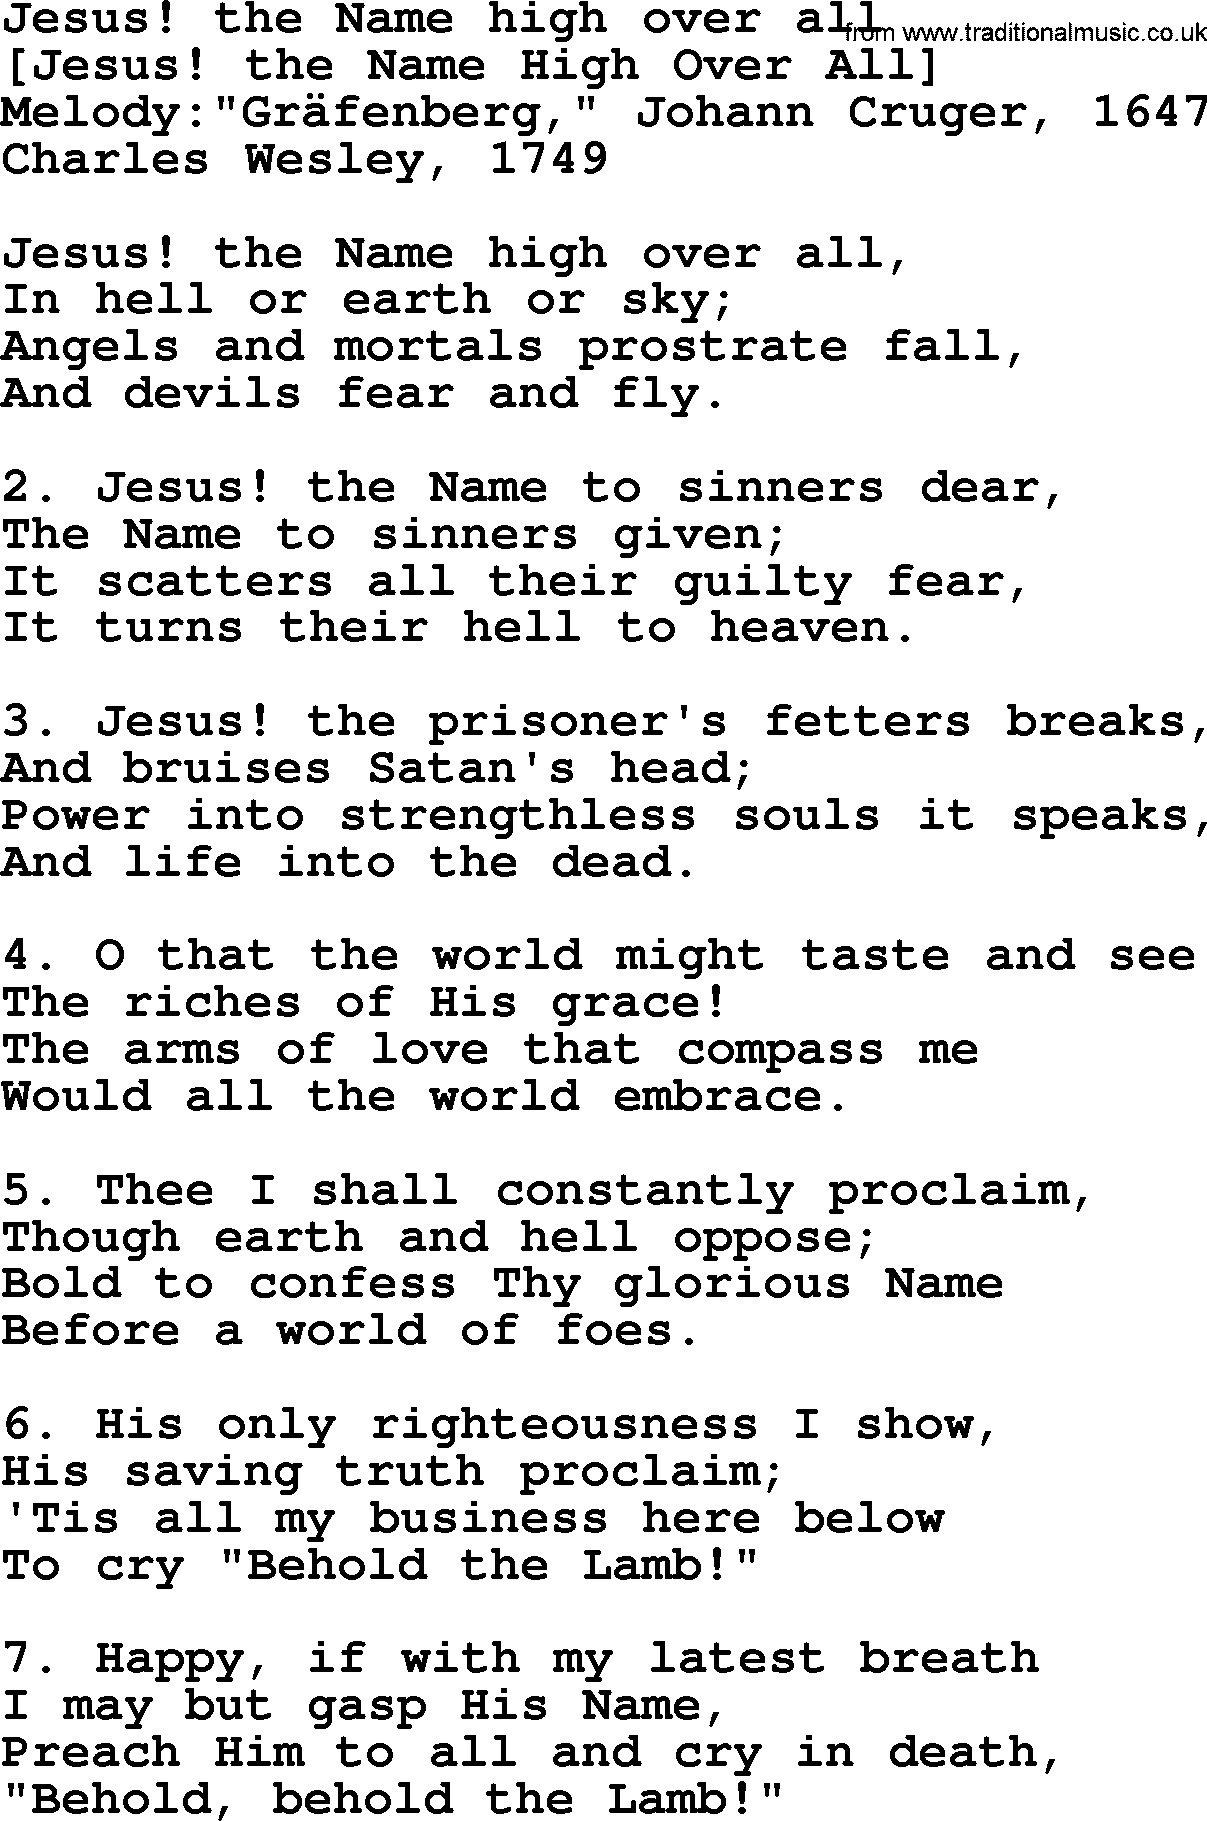 Old English Song: Jesus! The Name High Over All lyrics